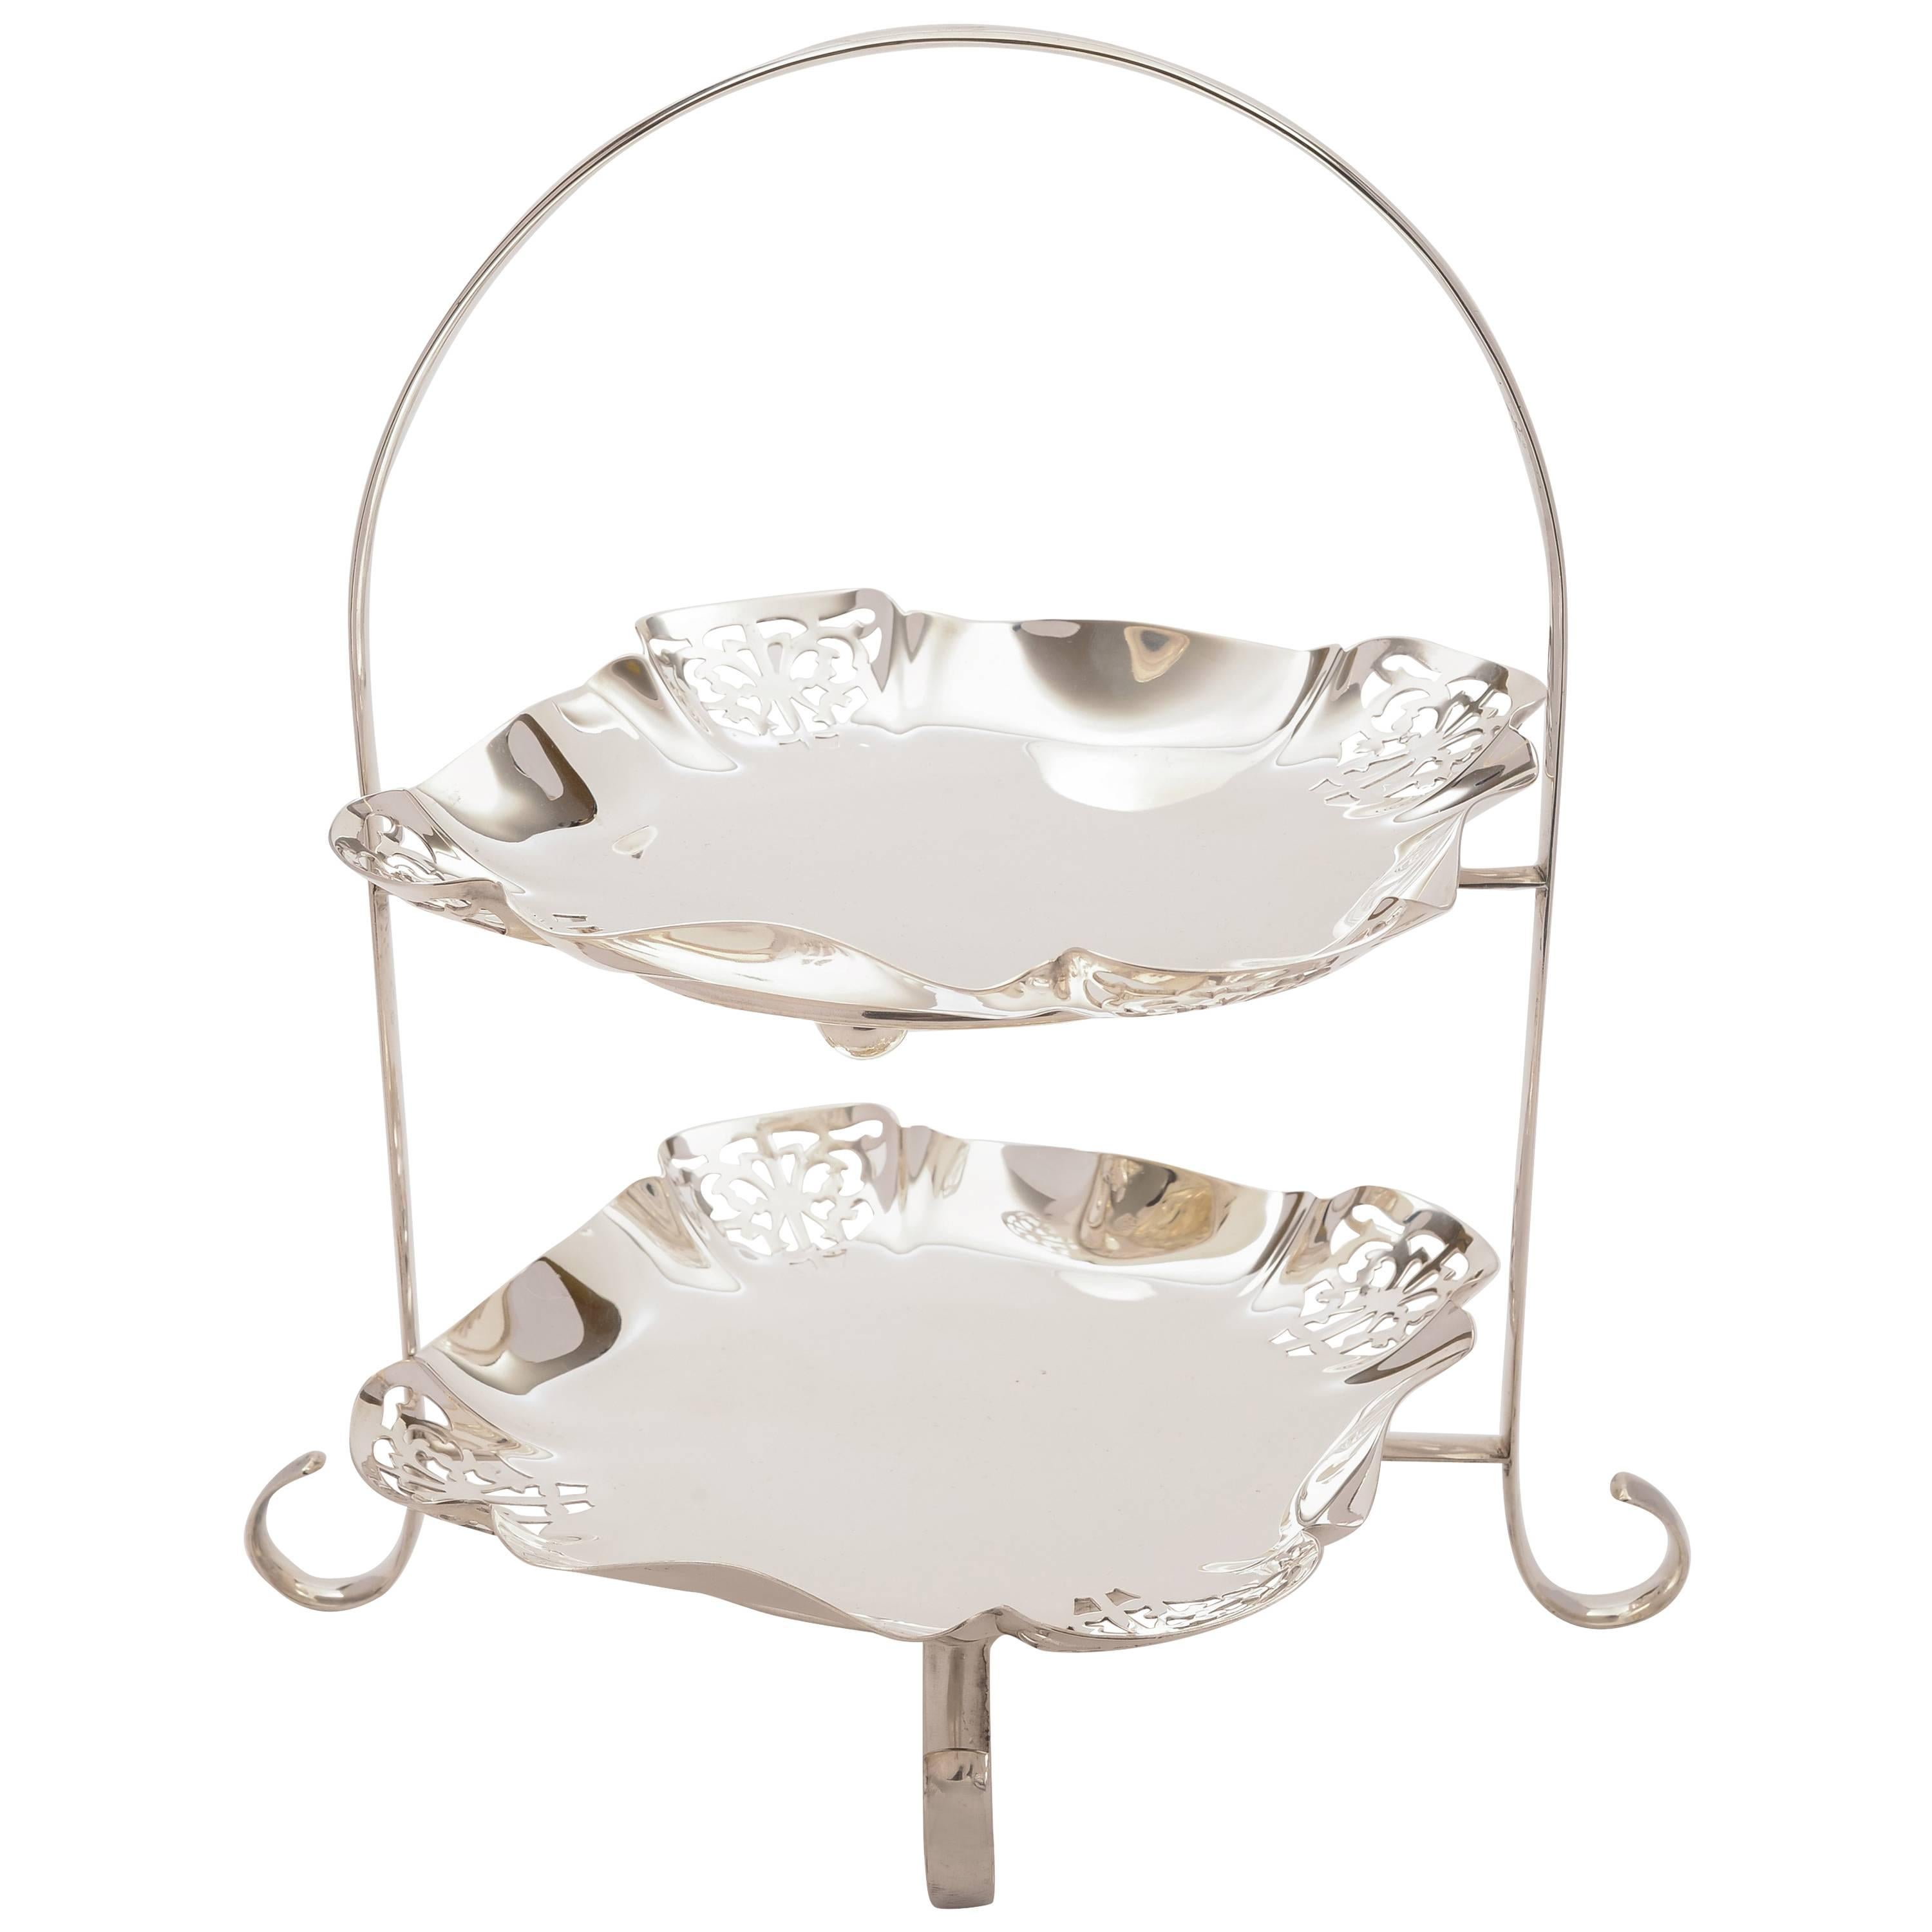 Early 20th Century Silver Plated Two-Tier Cake Stand For Sale